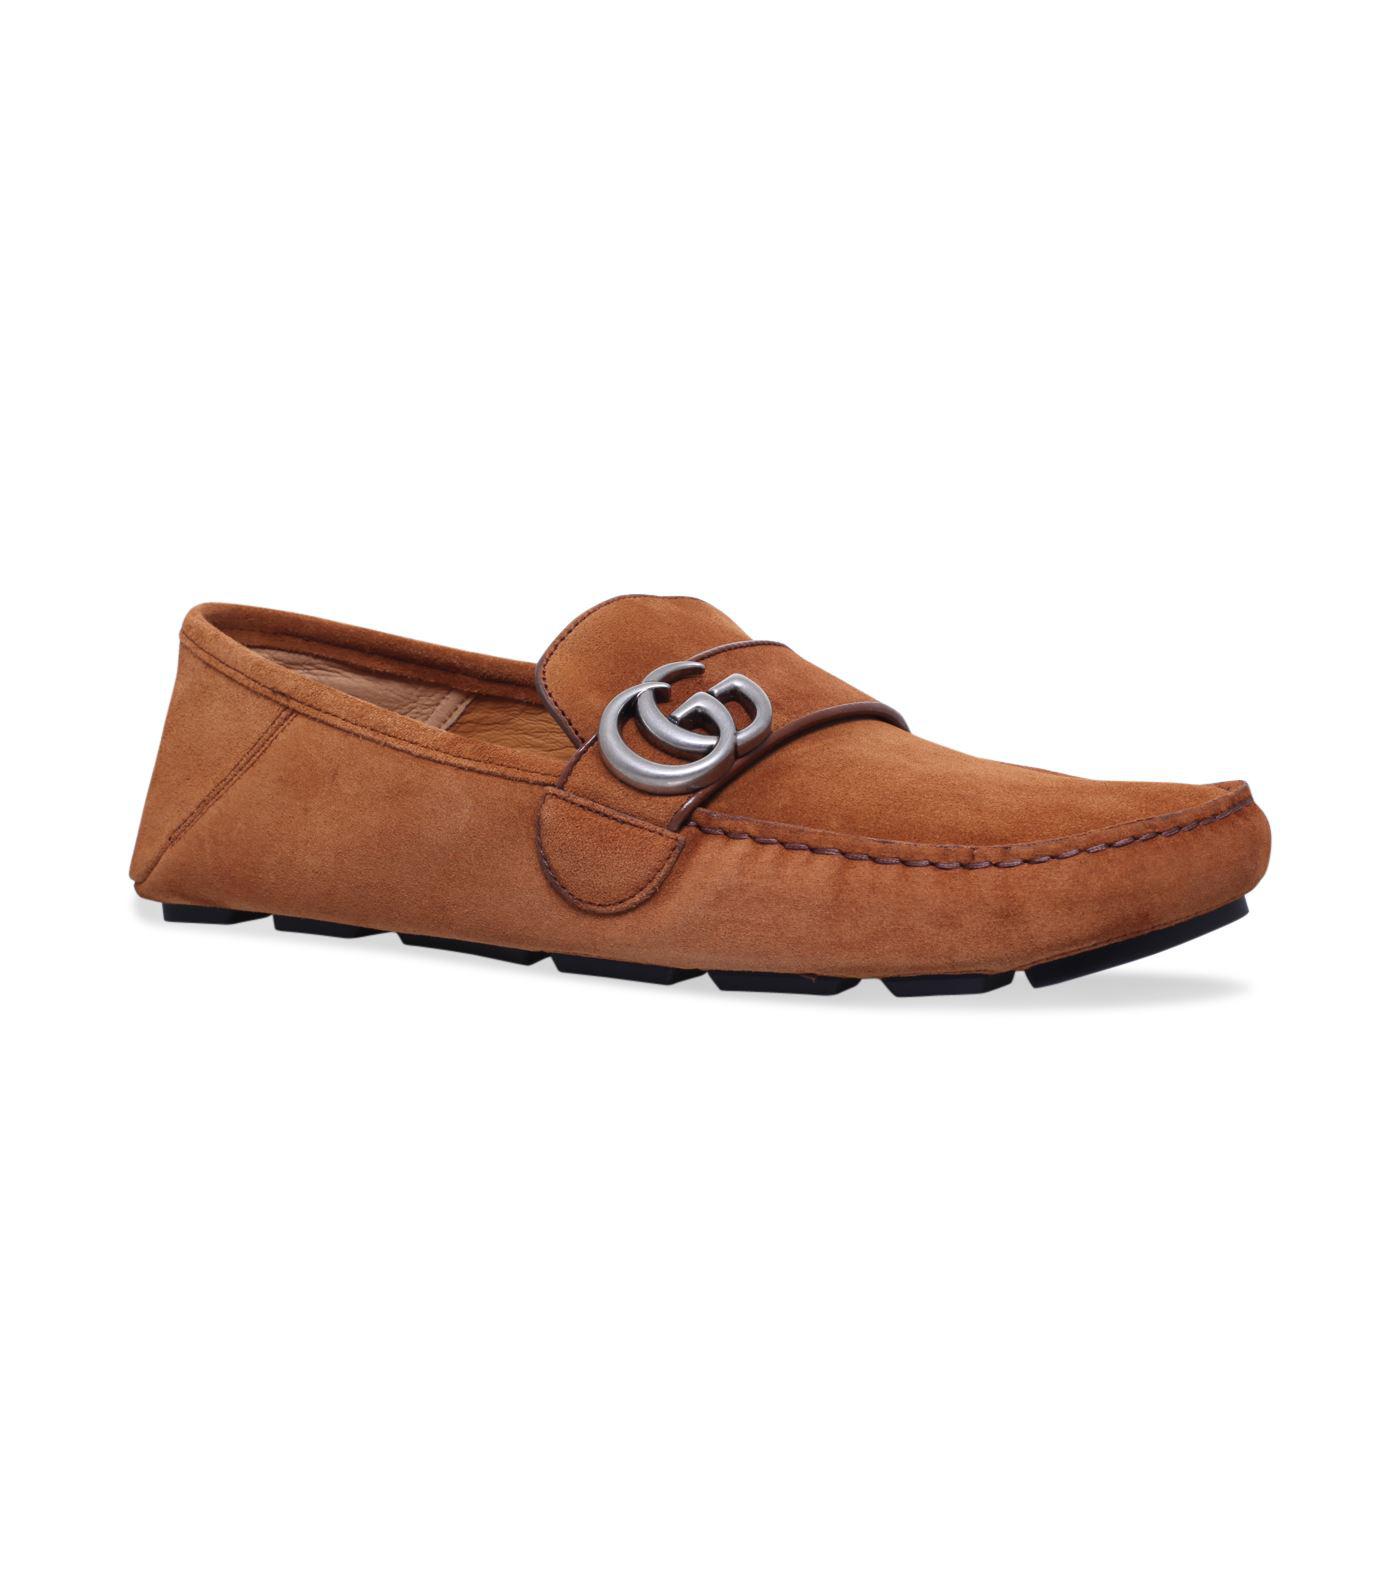 Gucci Noel Suede Driving Loafers in 